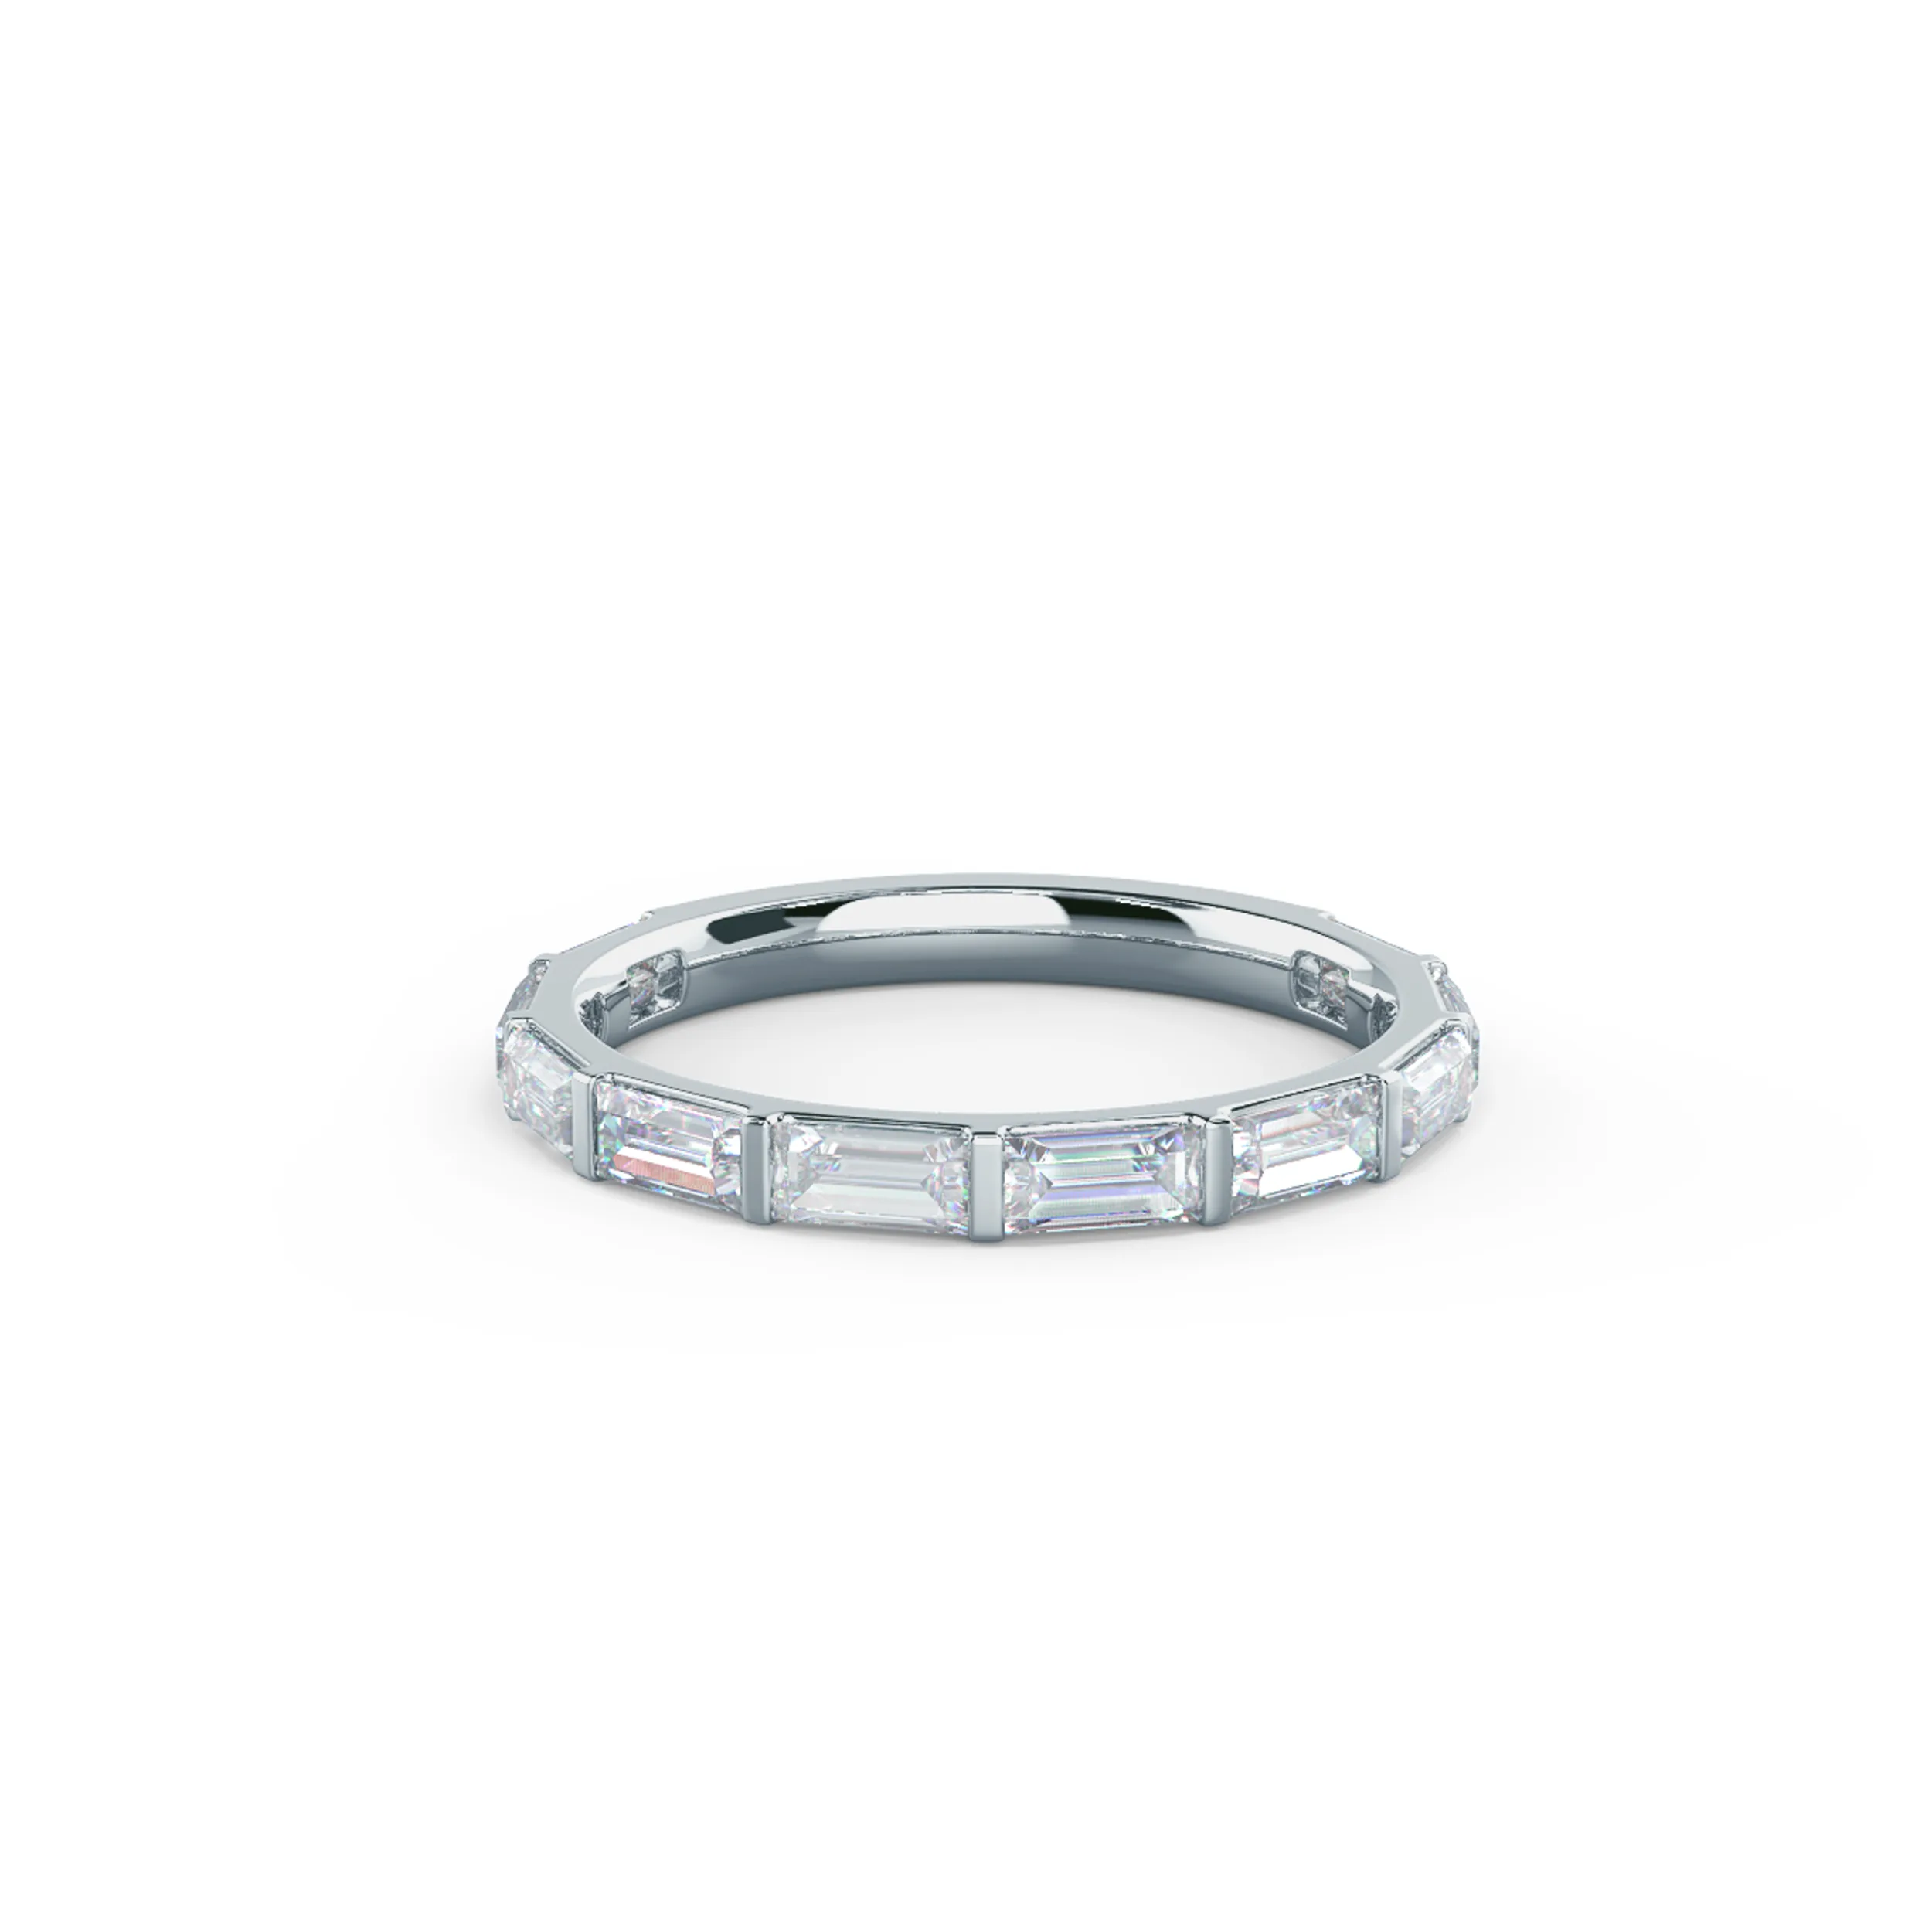 18k White Gold Baguette East-West Three Quarter Band featuring 1.1 ctw Diamonds (Main View)